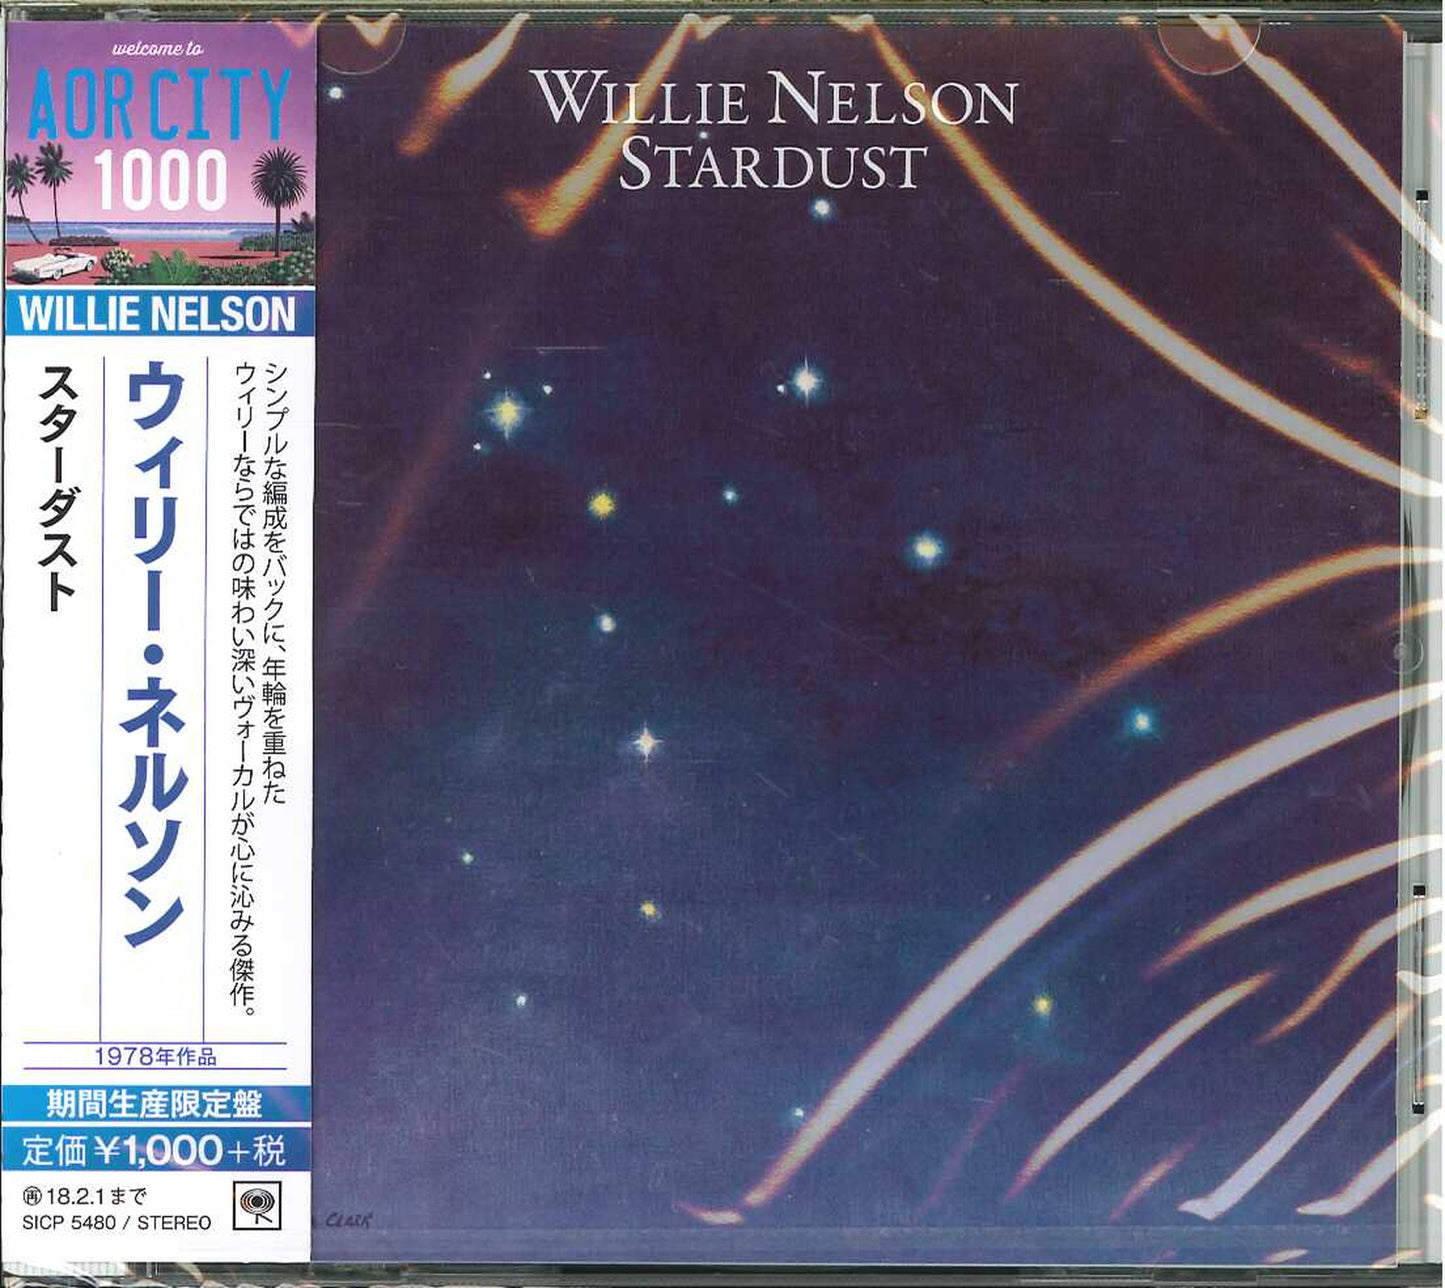 Willie Nelson - Stardust - Japan  CD Limited Edition